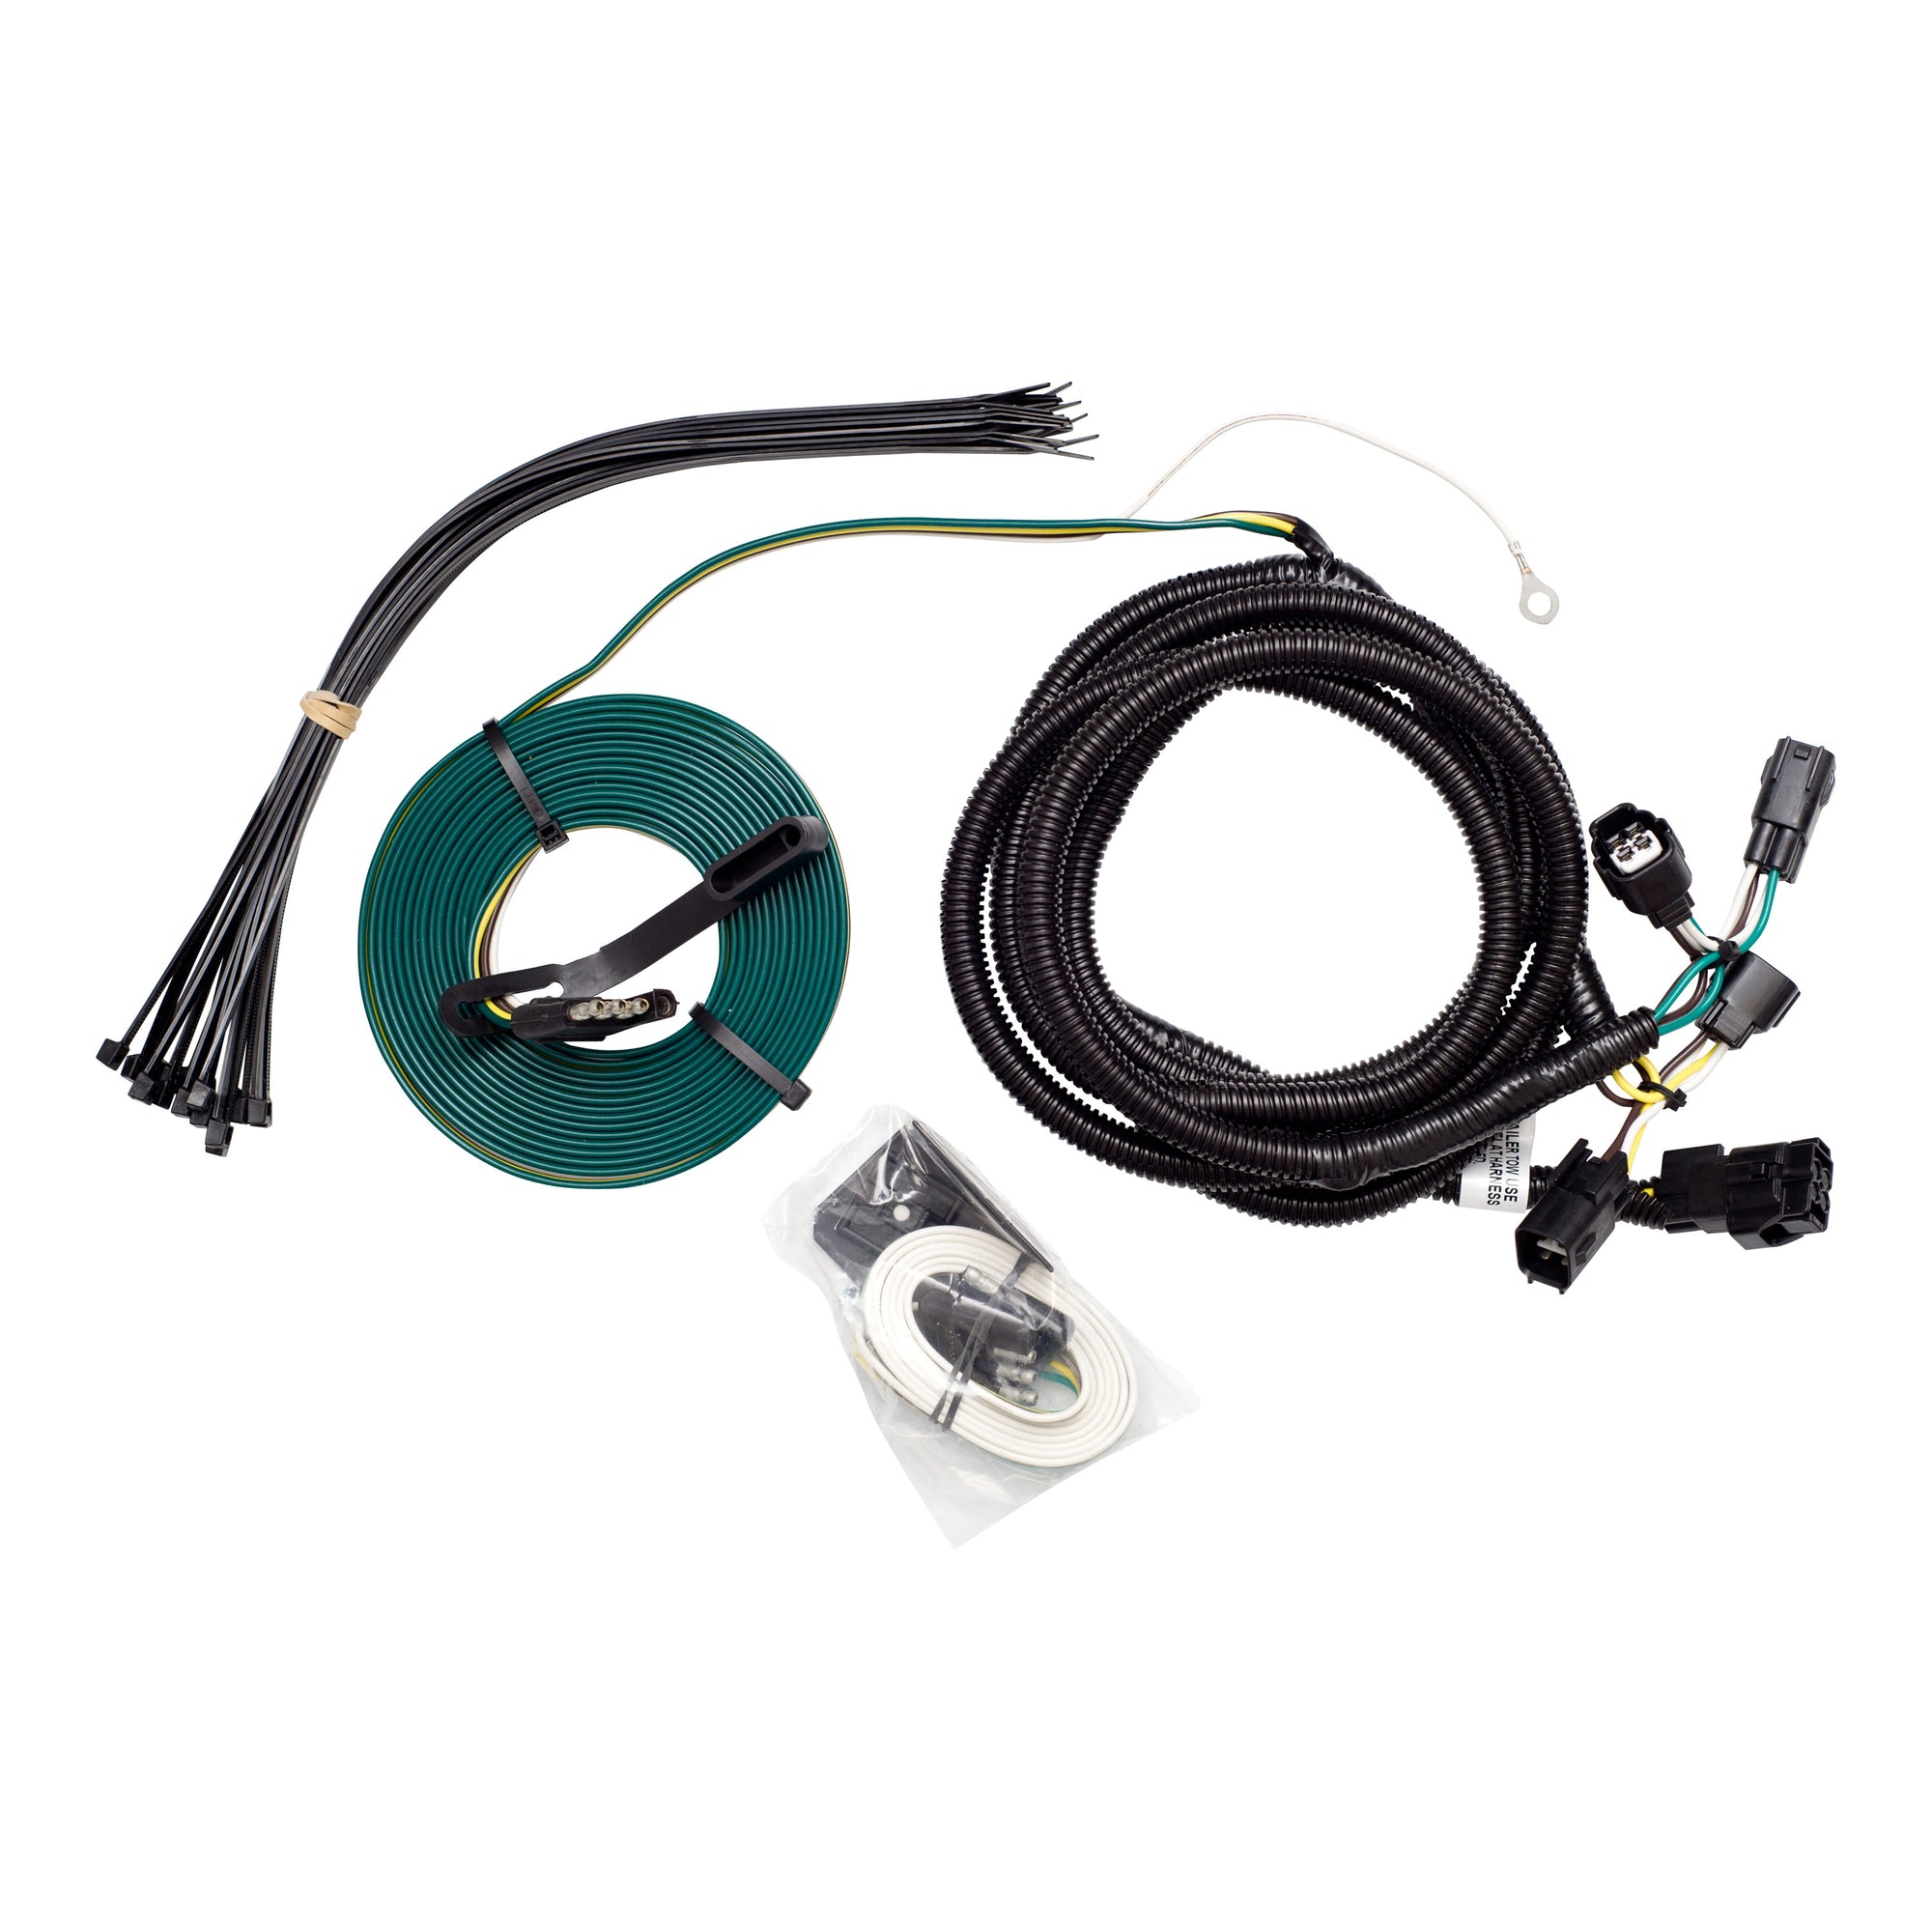 Demco 9523116 Towed Connector Vehicle Wiring Kit - For Ford Fiesta Hatchback '11-'14